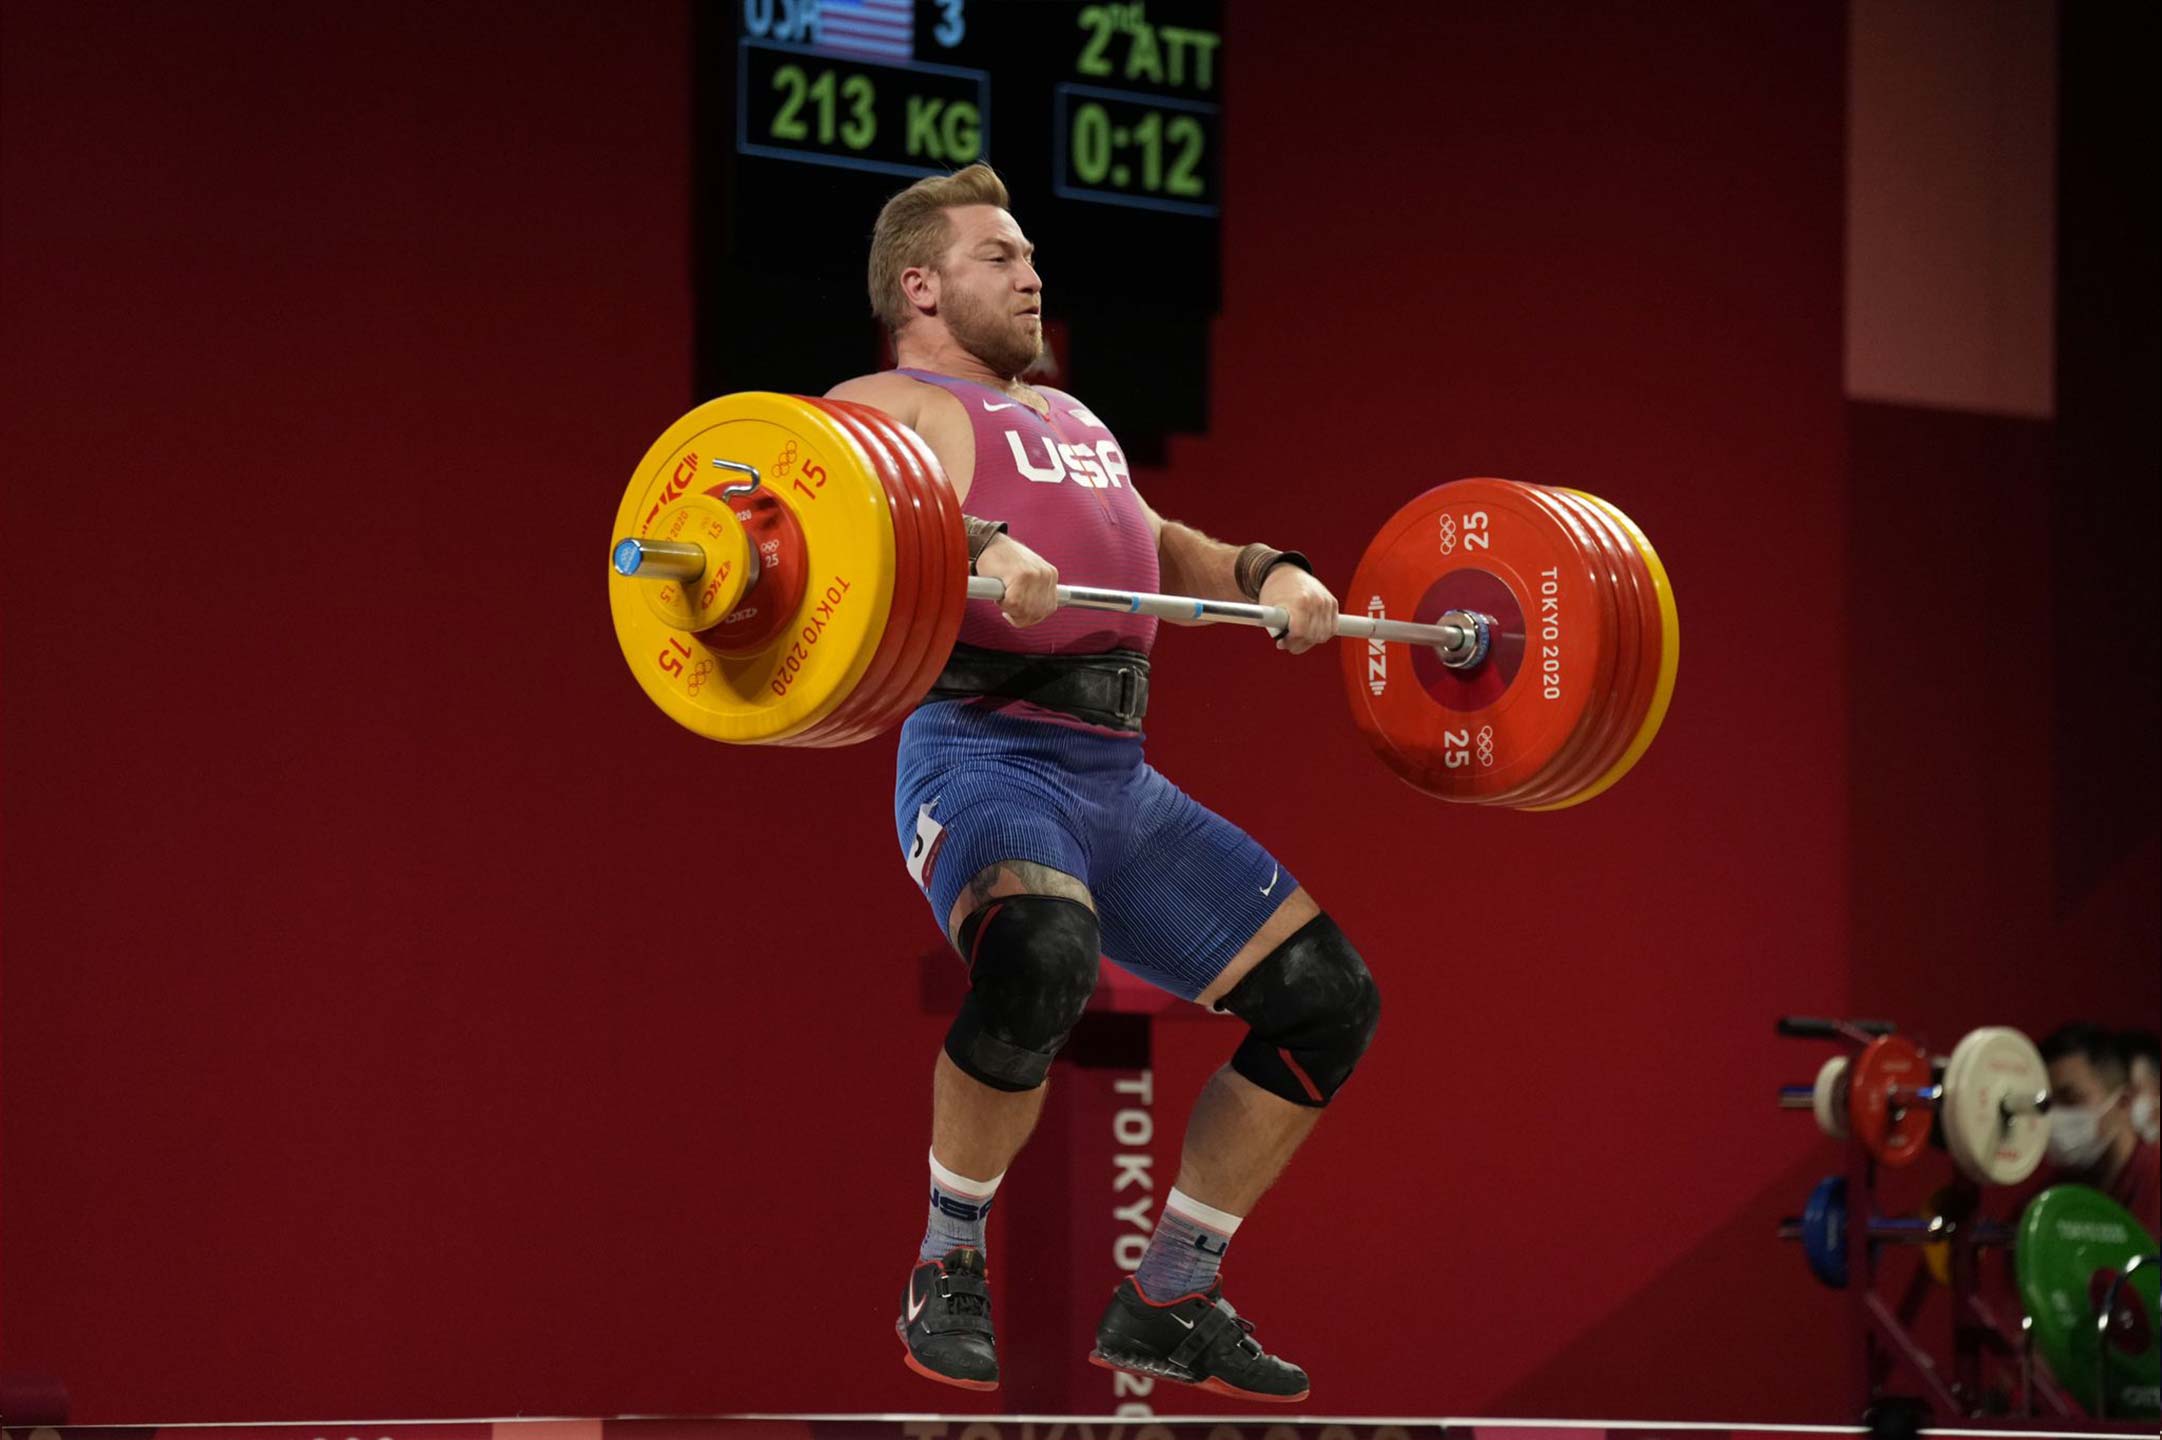 Wes-Kitts-USA-WEightlifting-bei-Olympia-in-Tokio